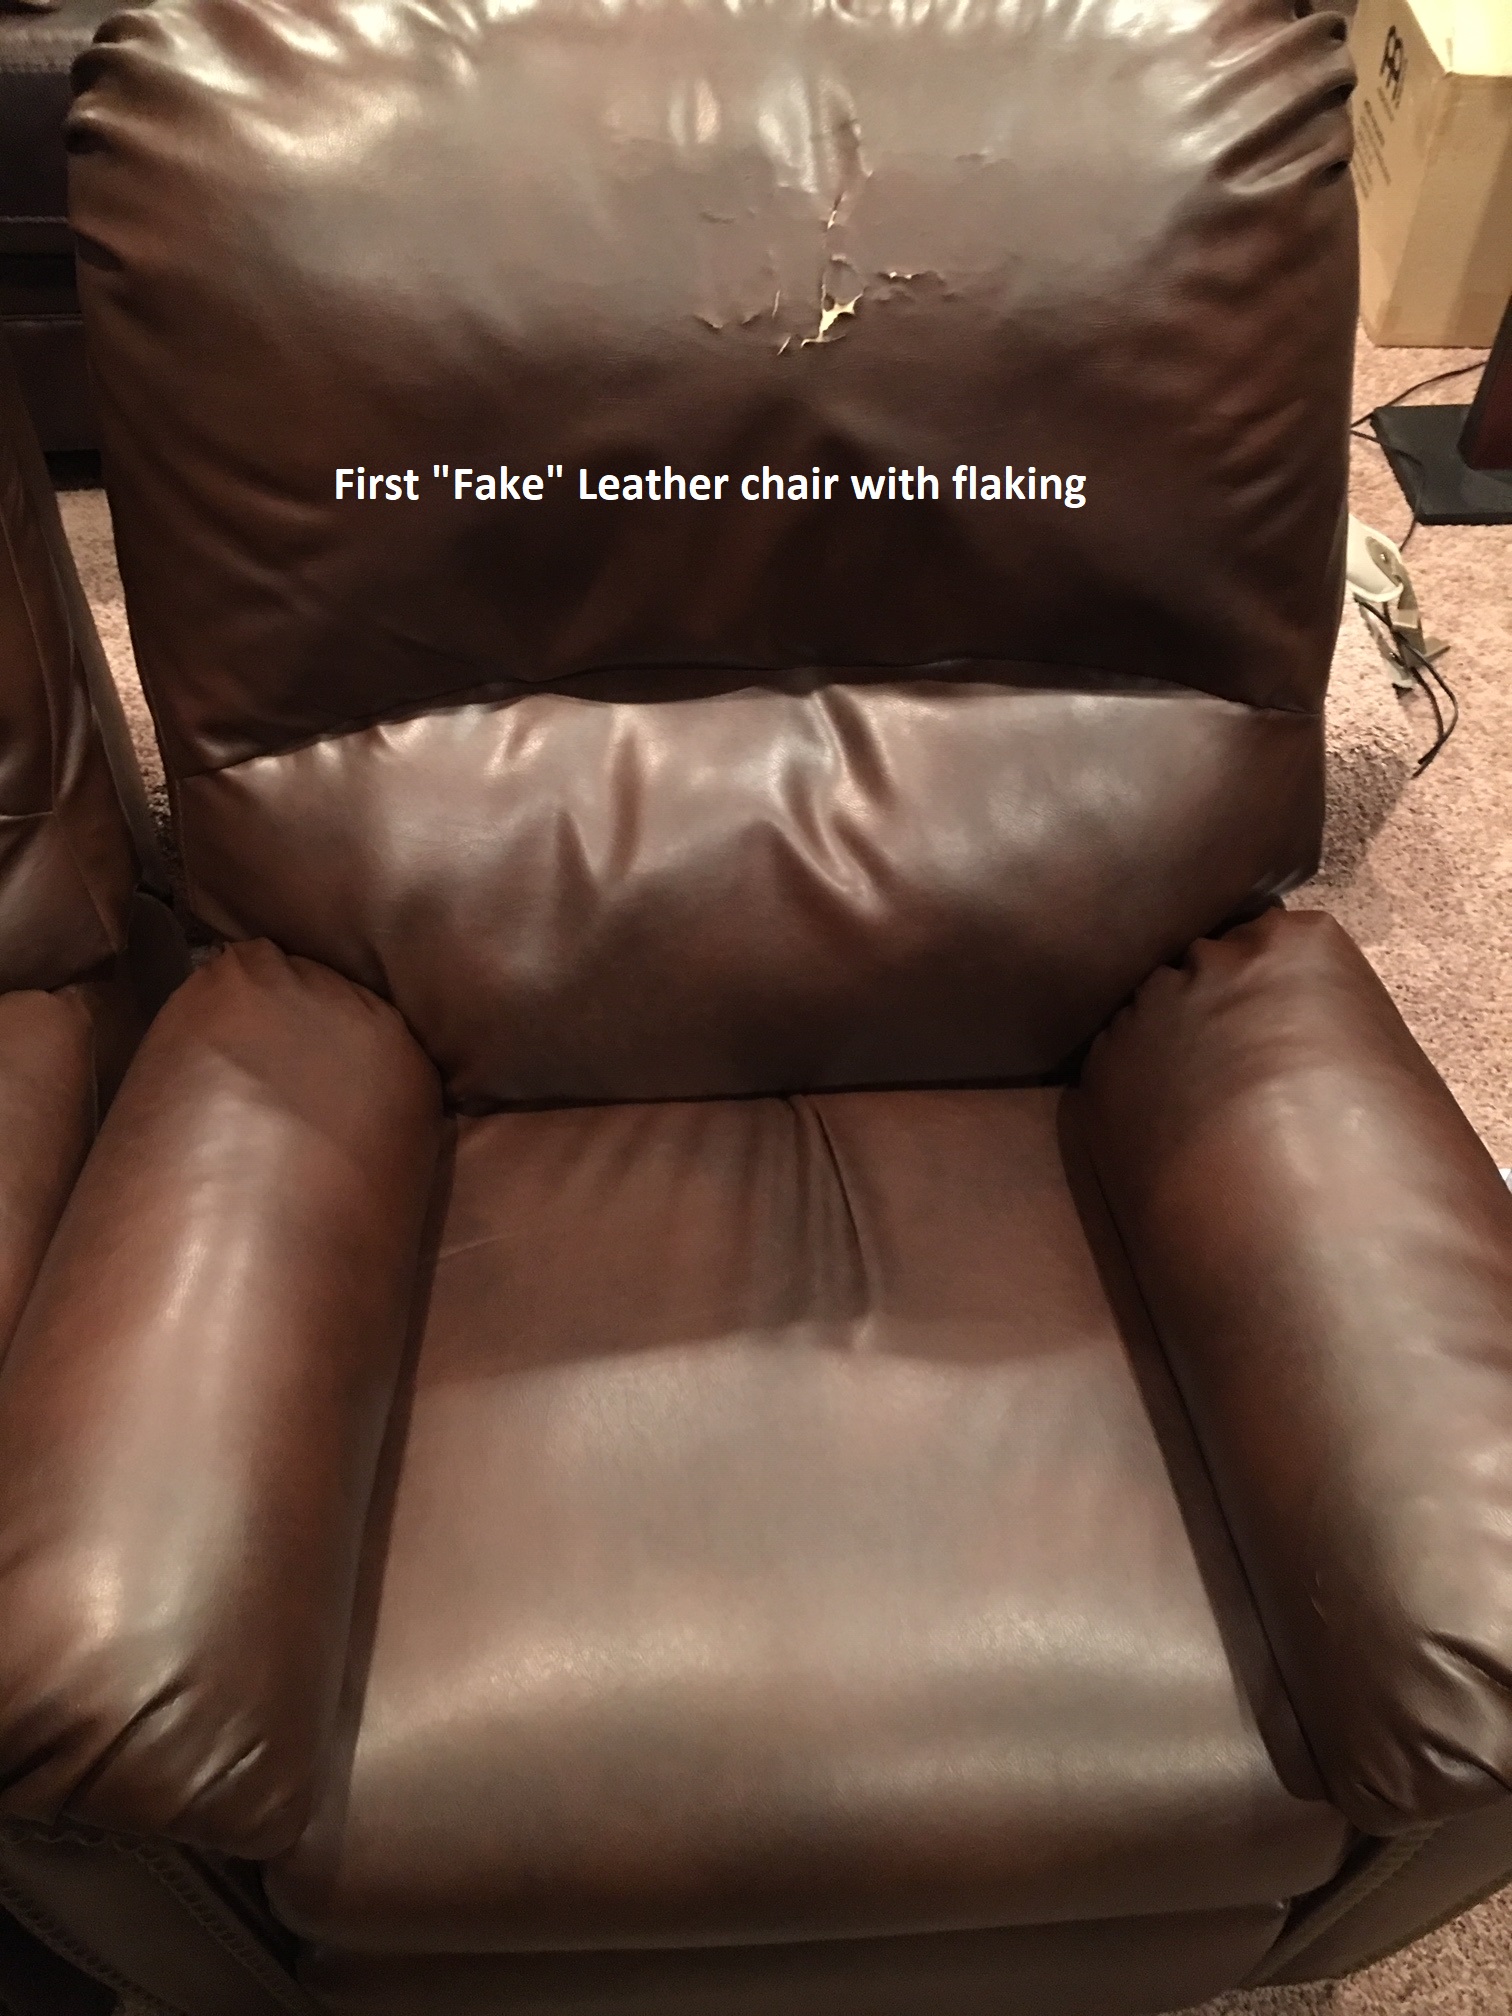 Top 10 Reviews Of Ashley Furniture Recliners,Saltwater Fish Tank Decor